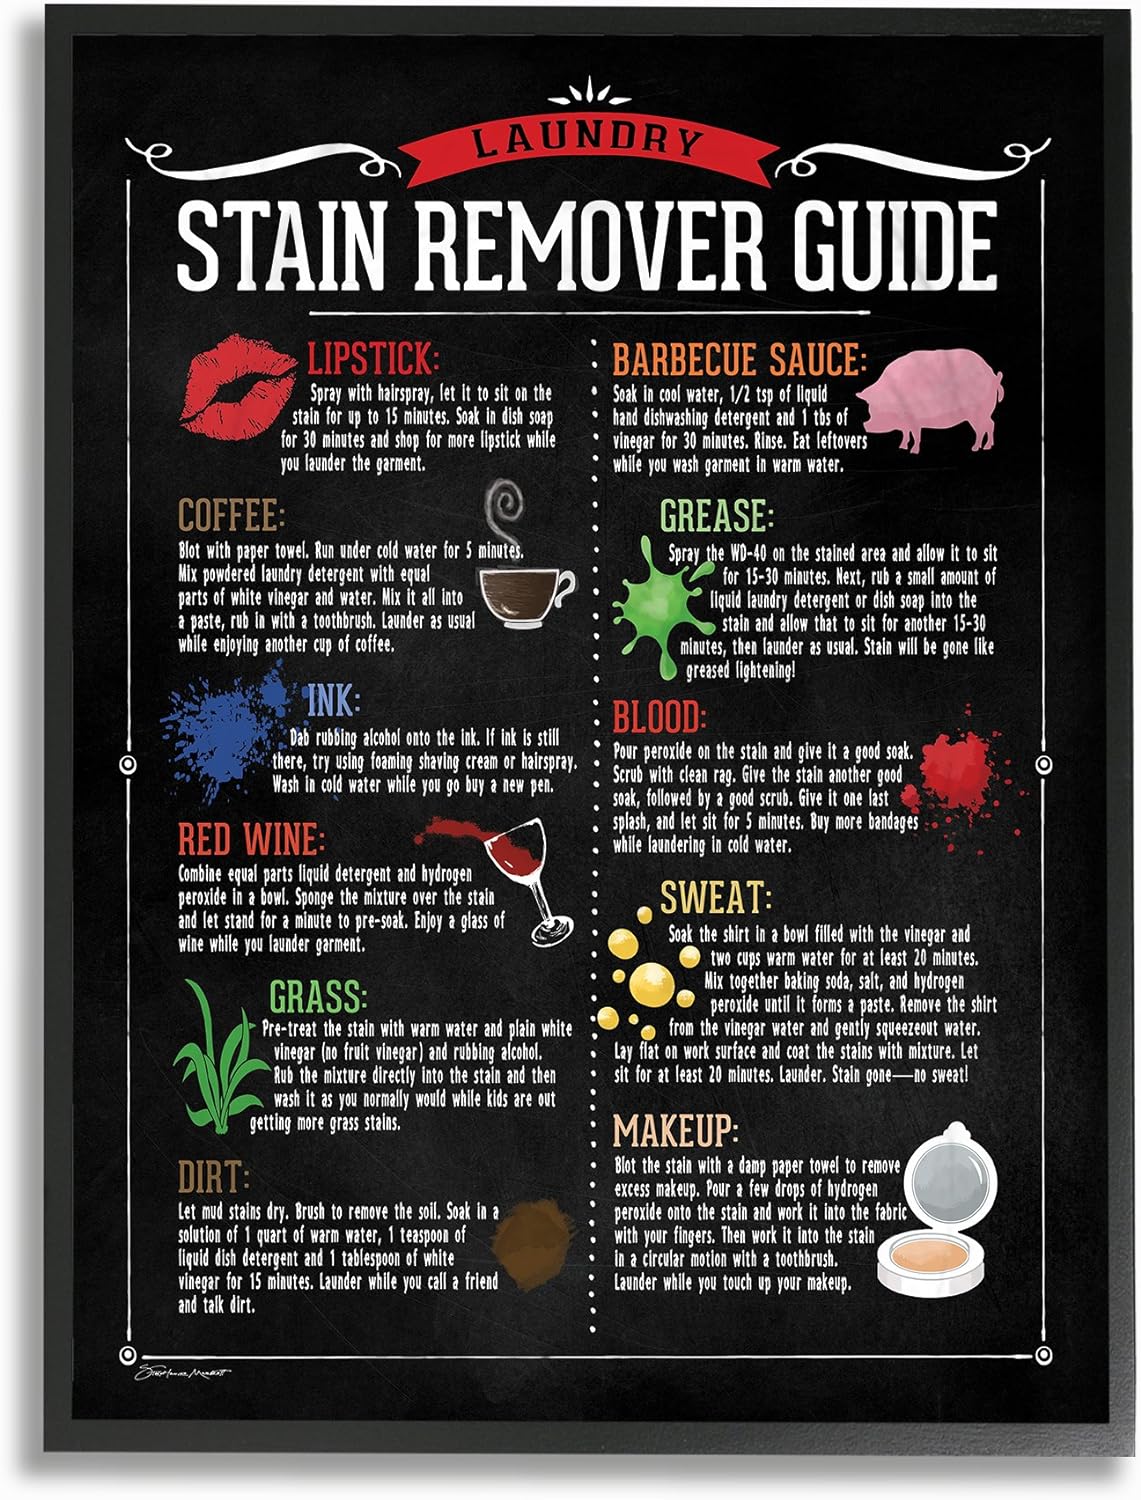 The Stupell Home Decor Collection Laundry Stain Remover Guide